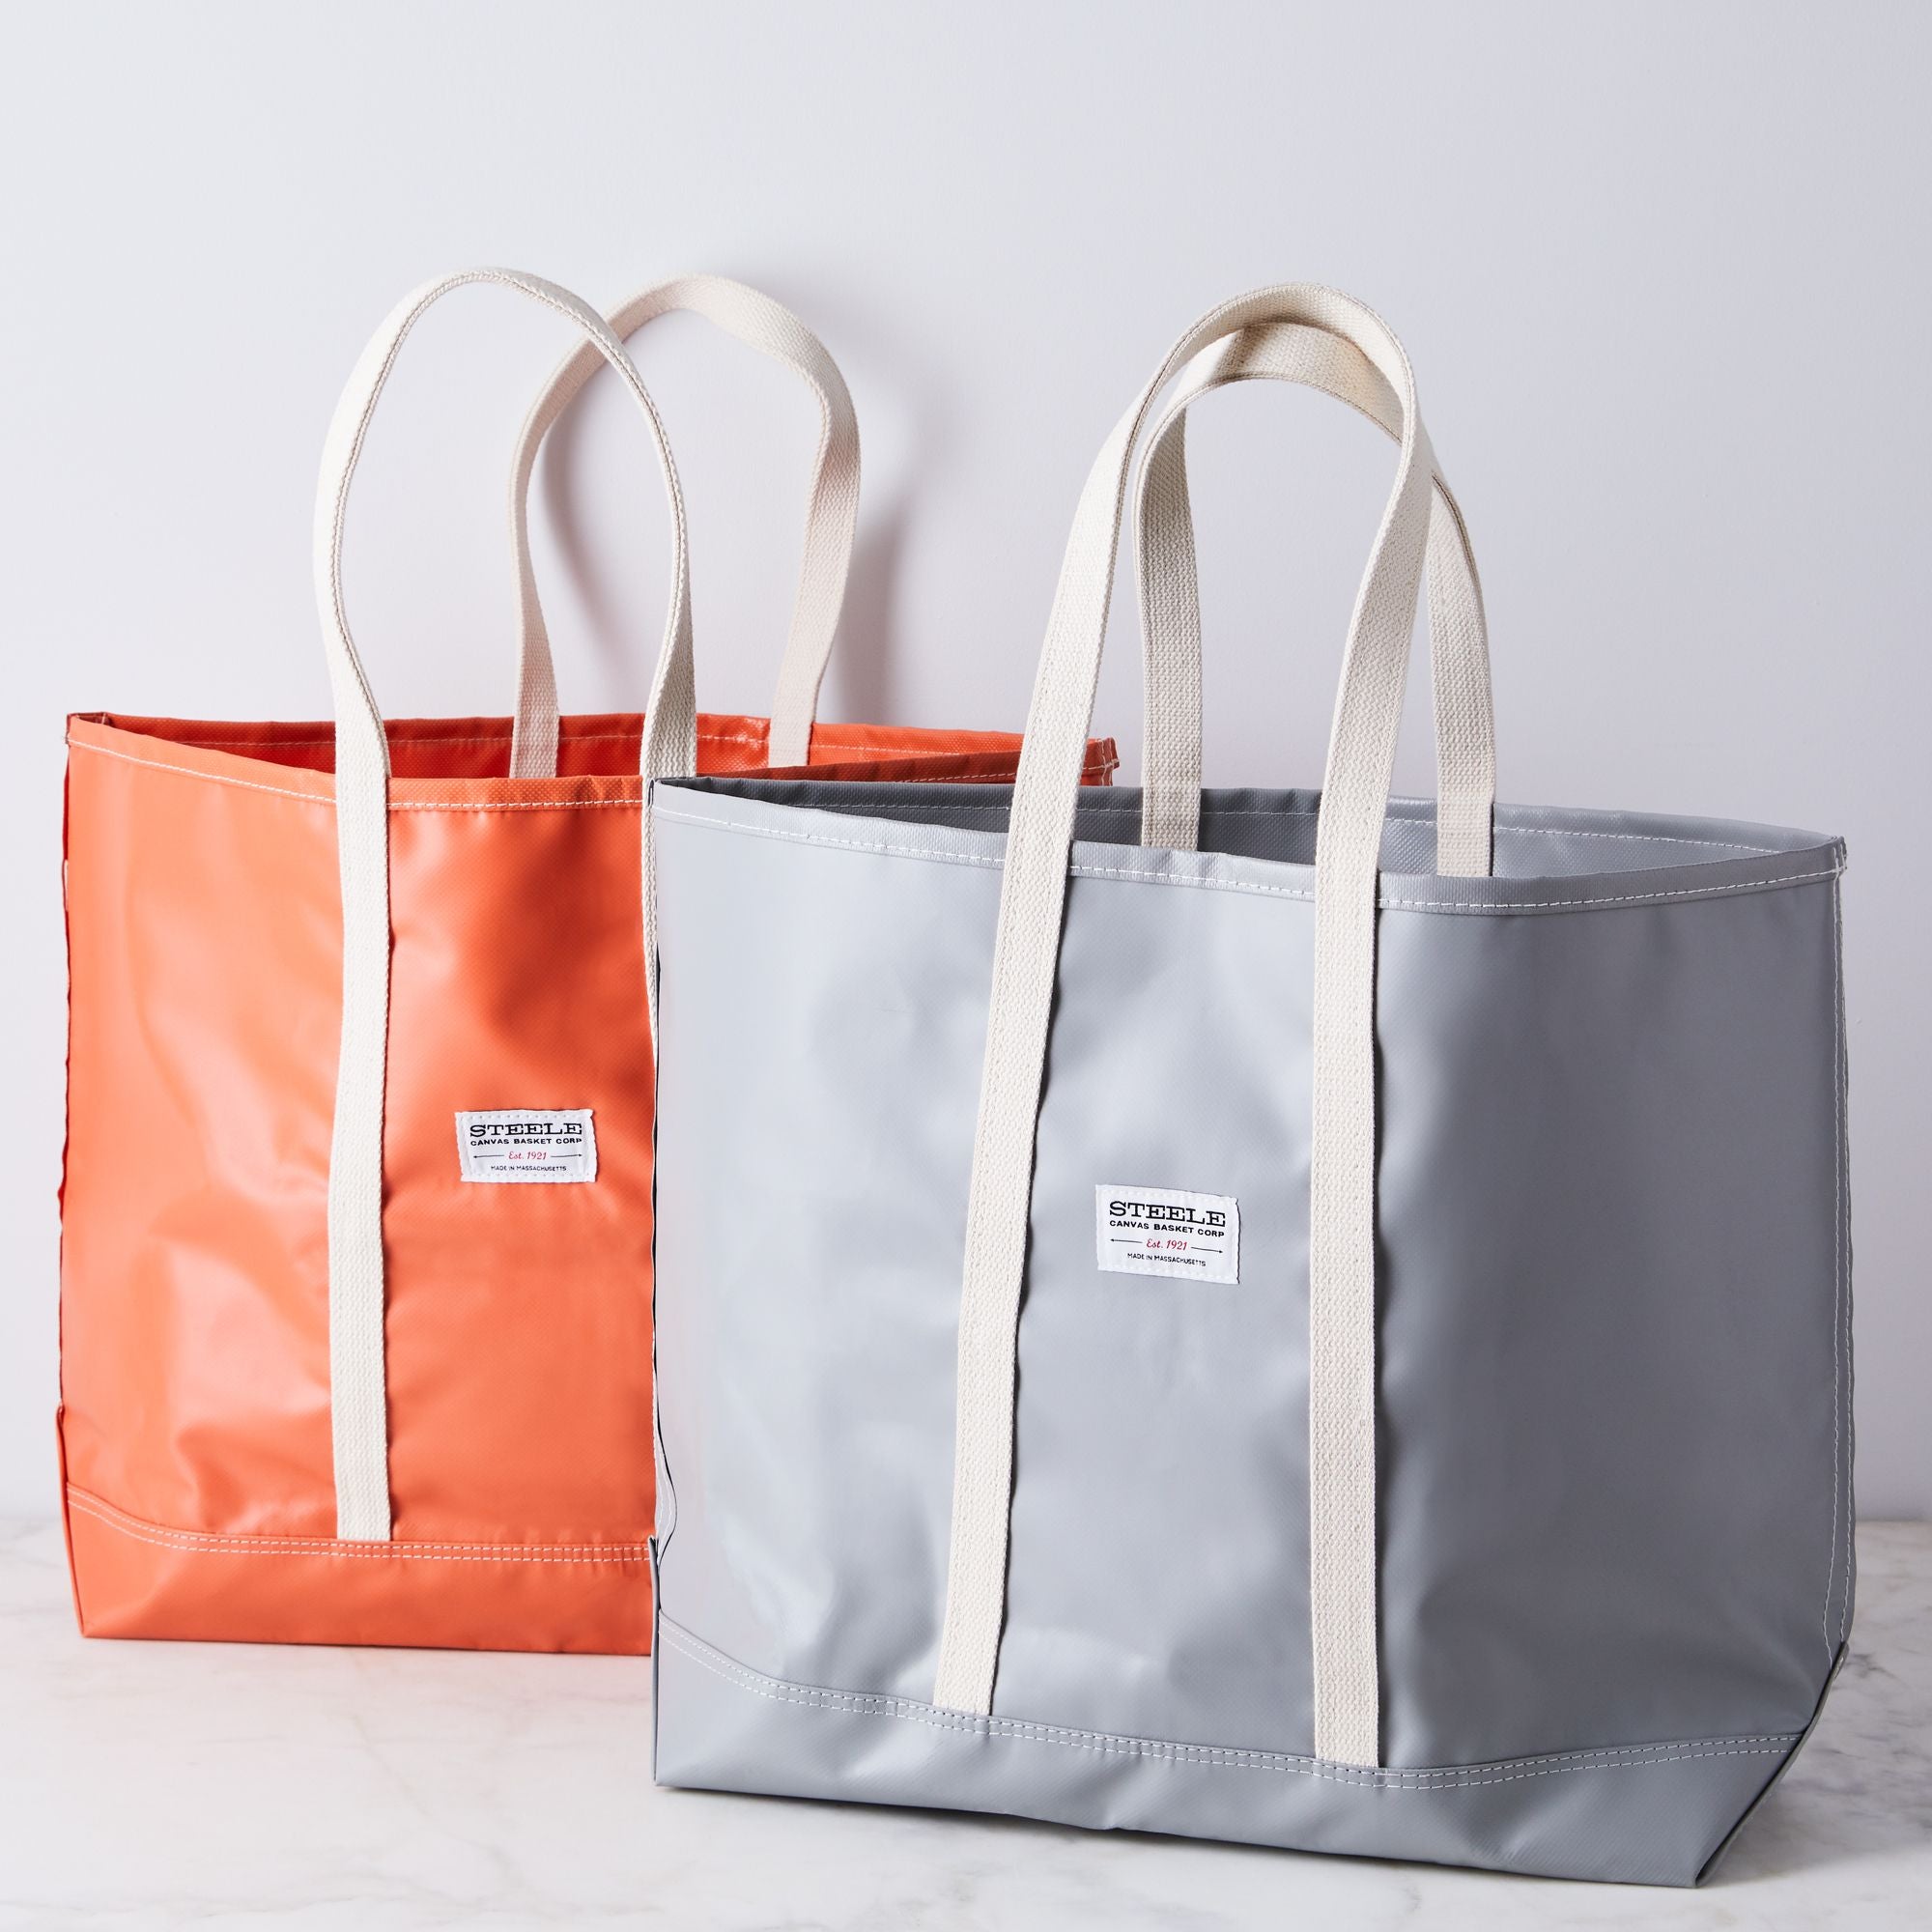 10 Best Beach Tote Bags For Summer Activities 2021